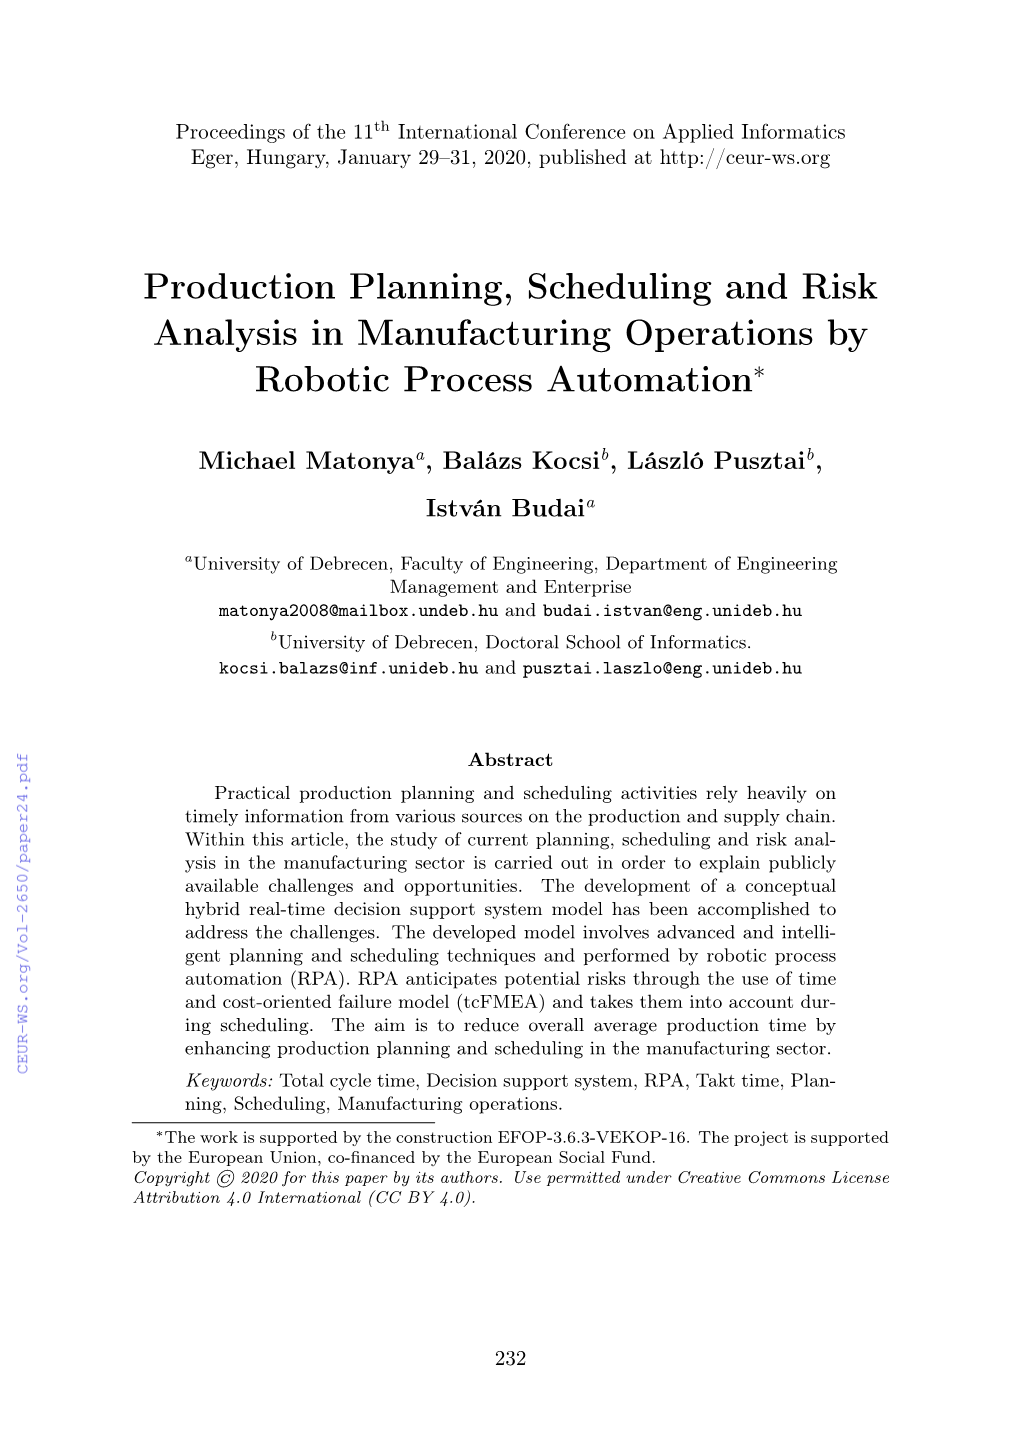 Production Planning, Scheduling and Risk Analysis in Manufacturing Operations by Robotic Process Automation∗